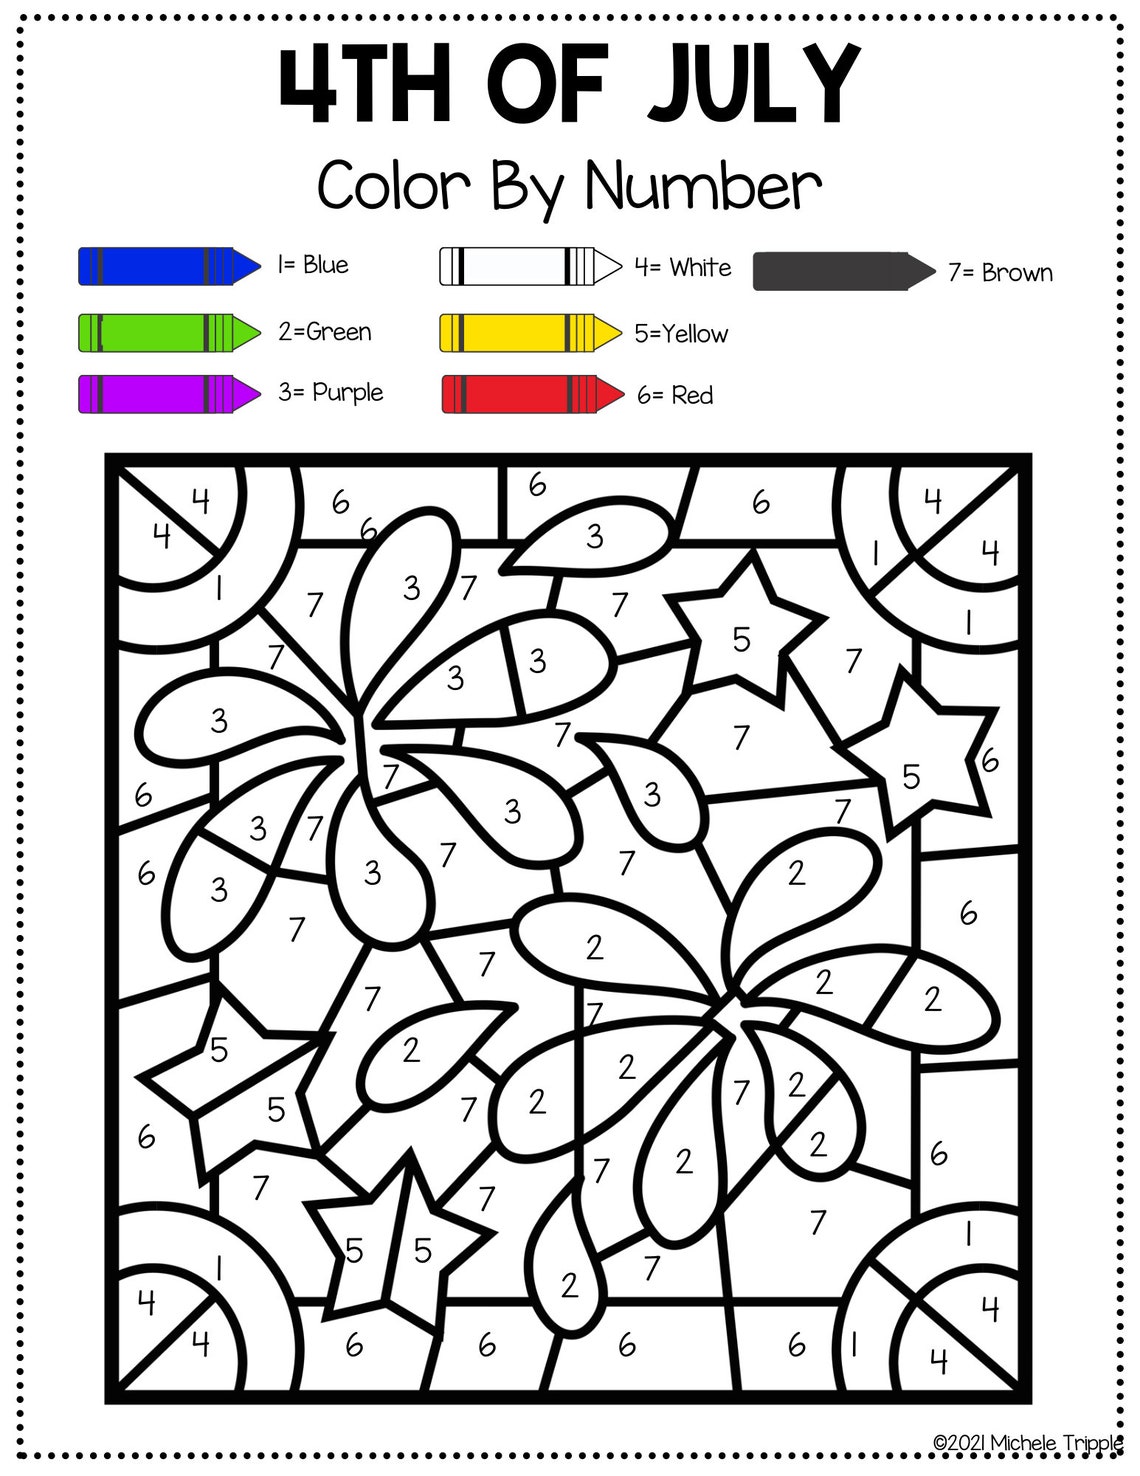 4th-of-july-color-by-number-sheets-are-perfect-activity-for-kindergarten-color-guide-for-kids